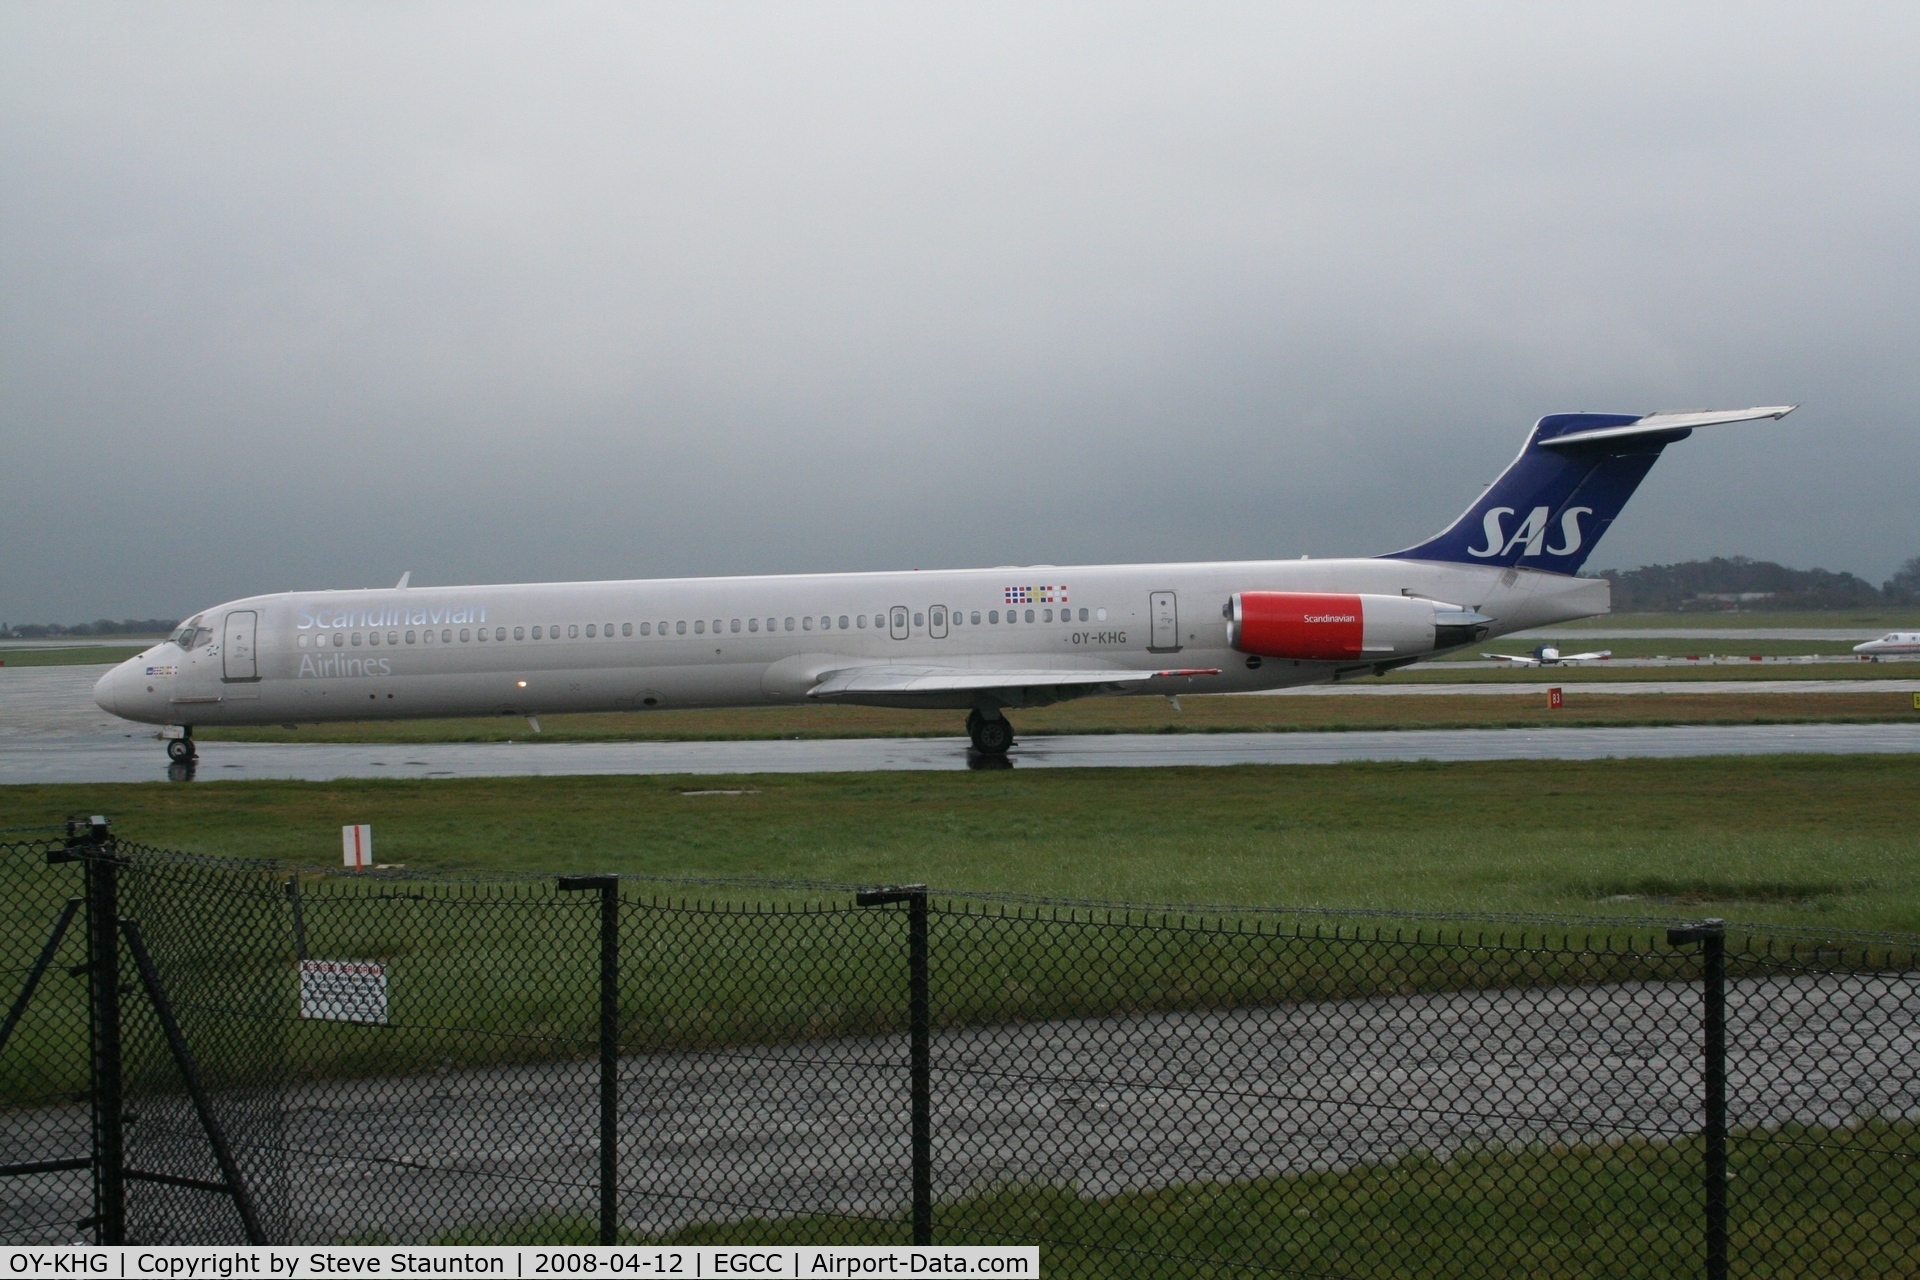 OY-KHG, 1988 McDonnell Douglas MD-82 (DC-9-82) C/N 49613, Taken at Manchester Airport on a typical showery April day